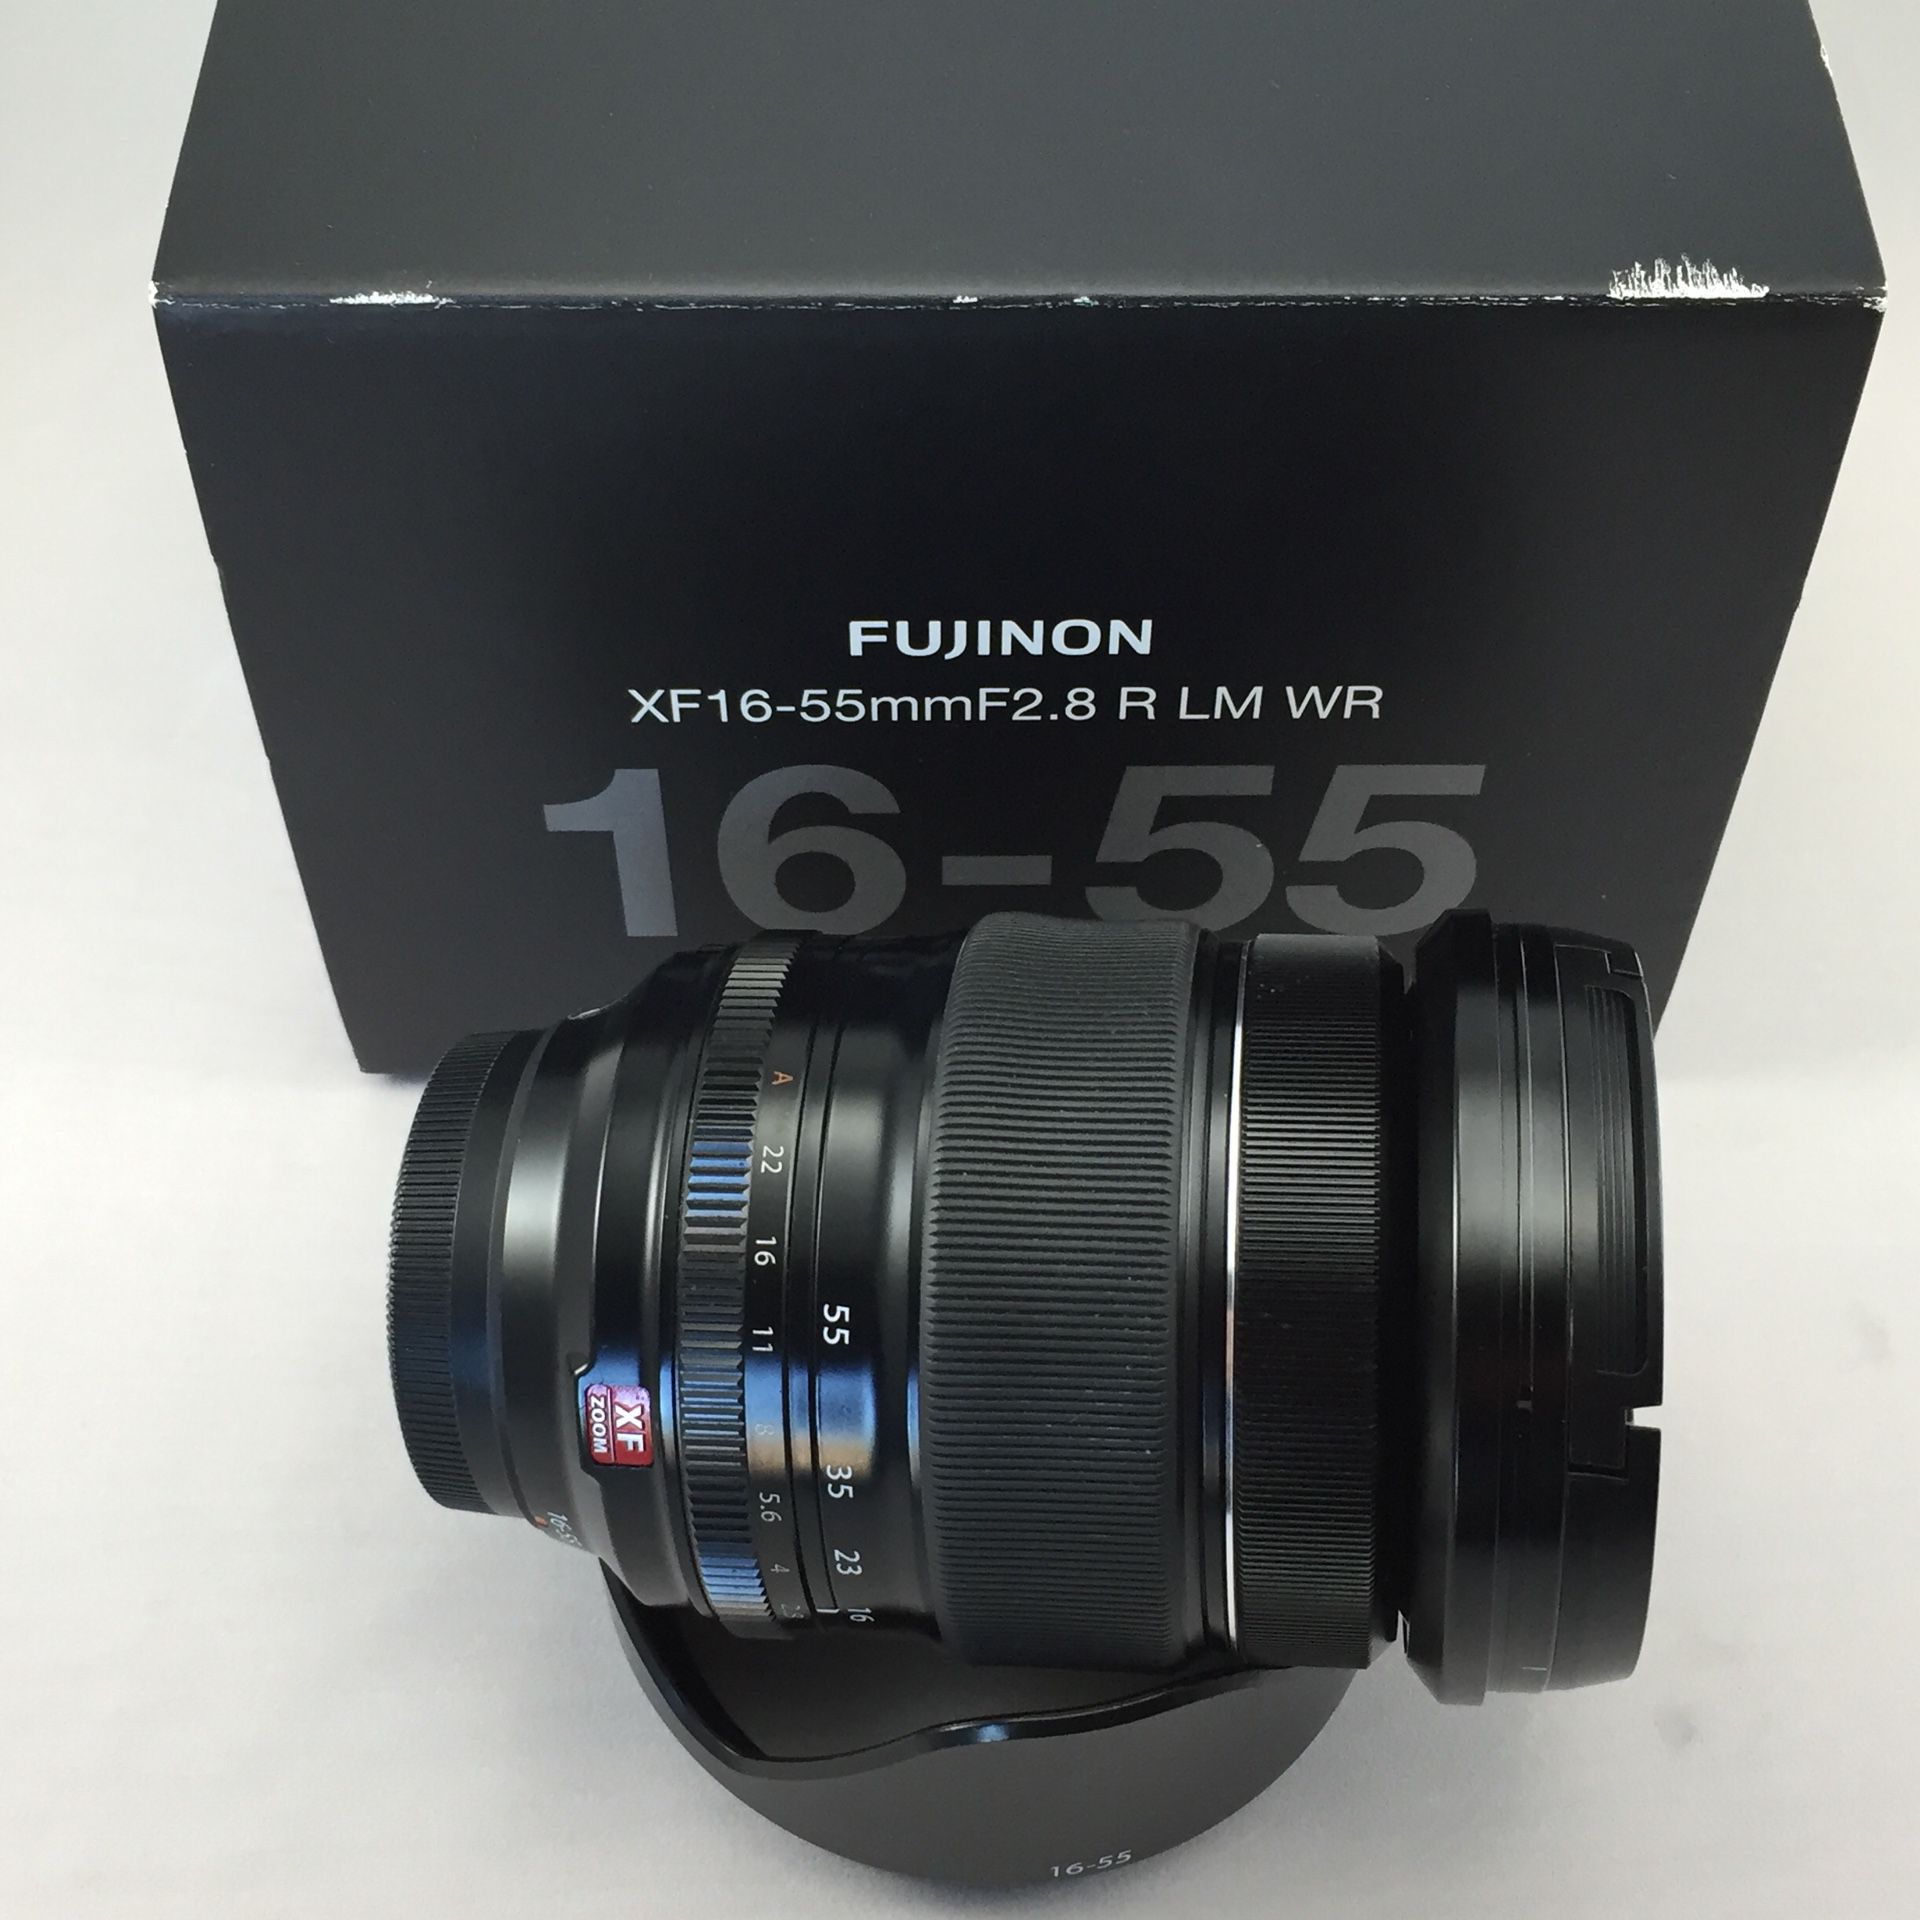 Fujinon Xf 16 55 F 2 8 Wr Weather Sealed For Sale In Katy Tx Offerup